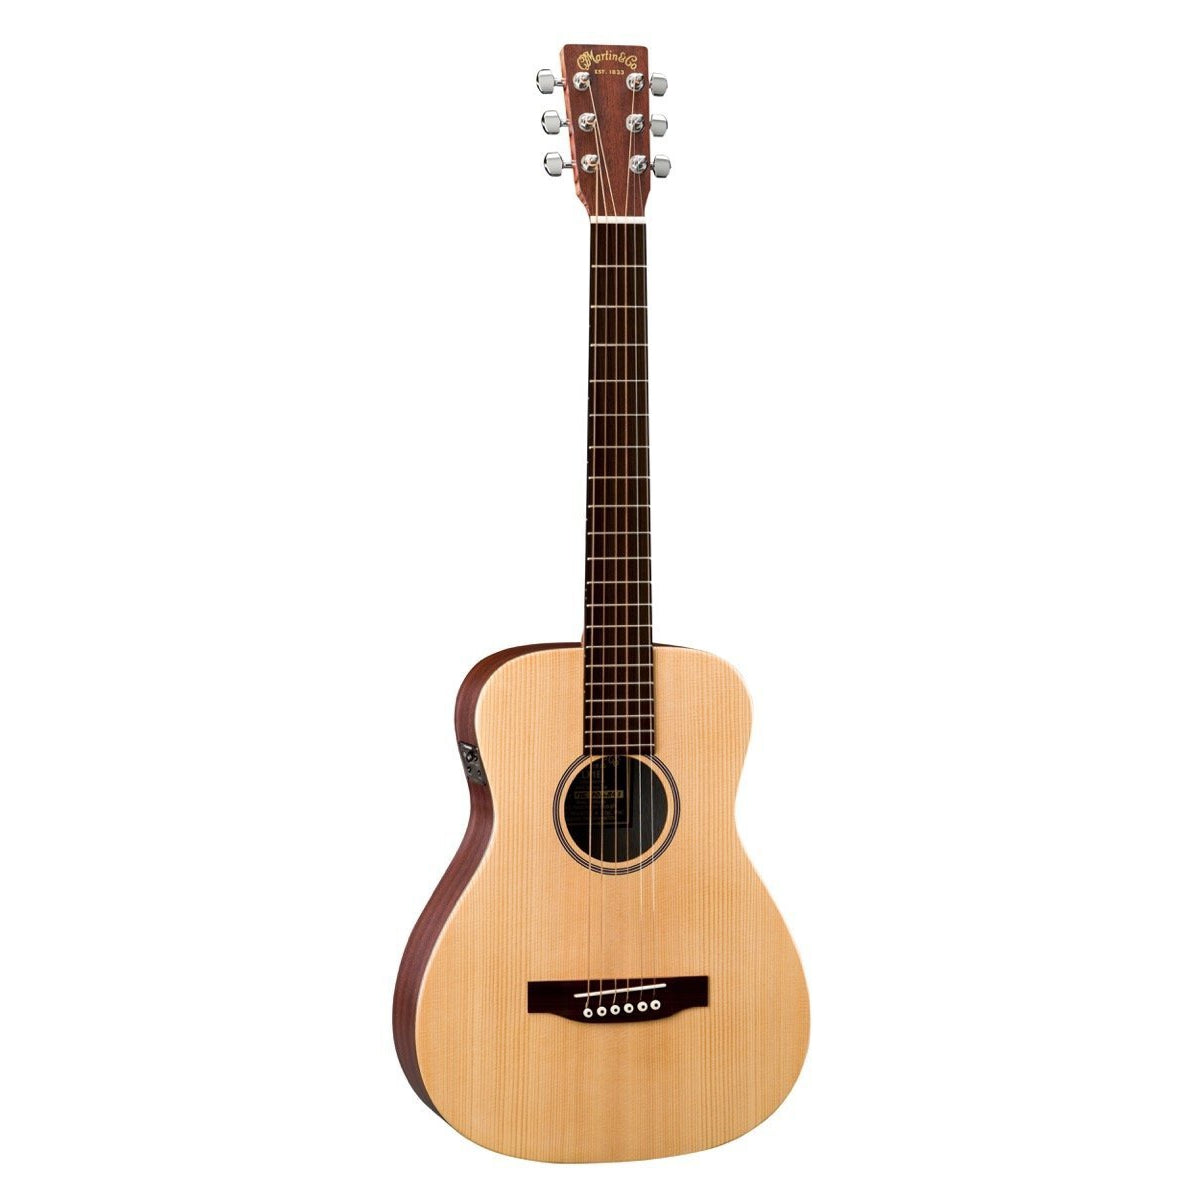 Martin LX1E Little Martin Acoustic-Electric Guitar (with Gig Bag), Natural